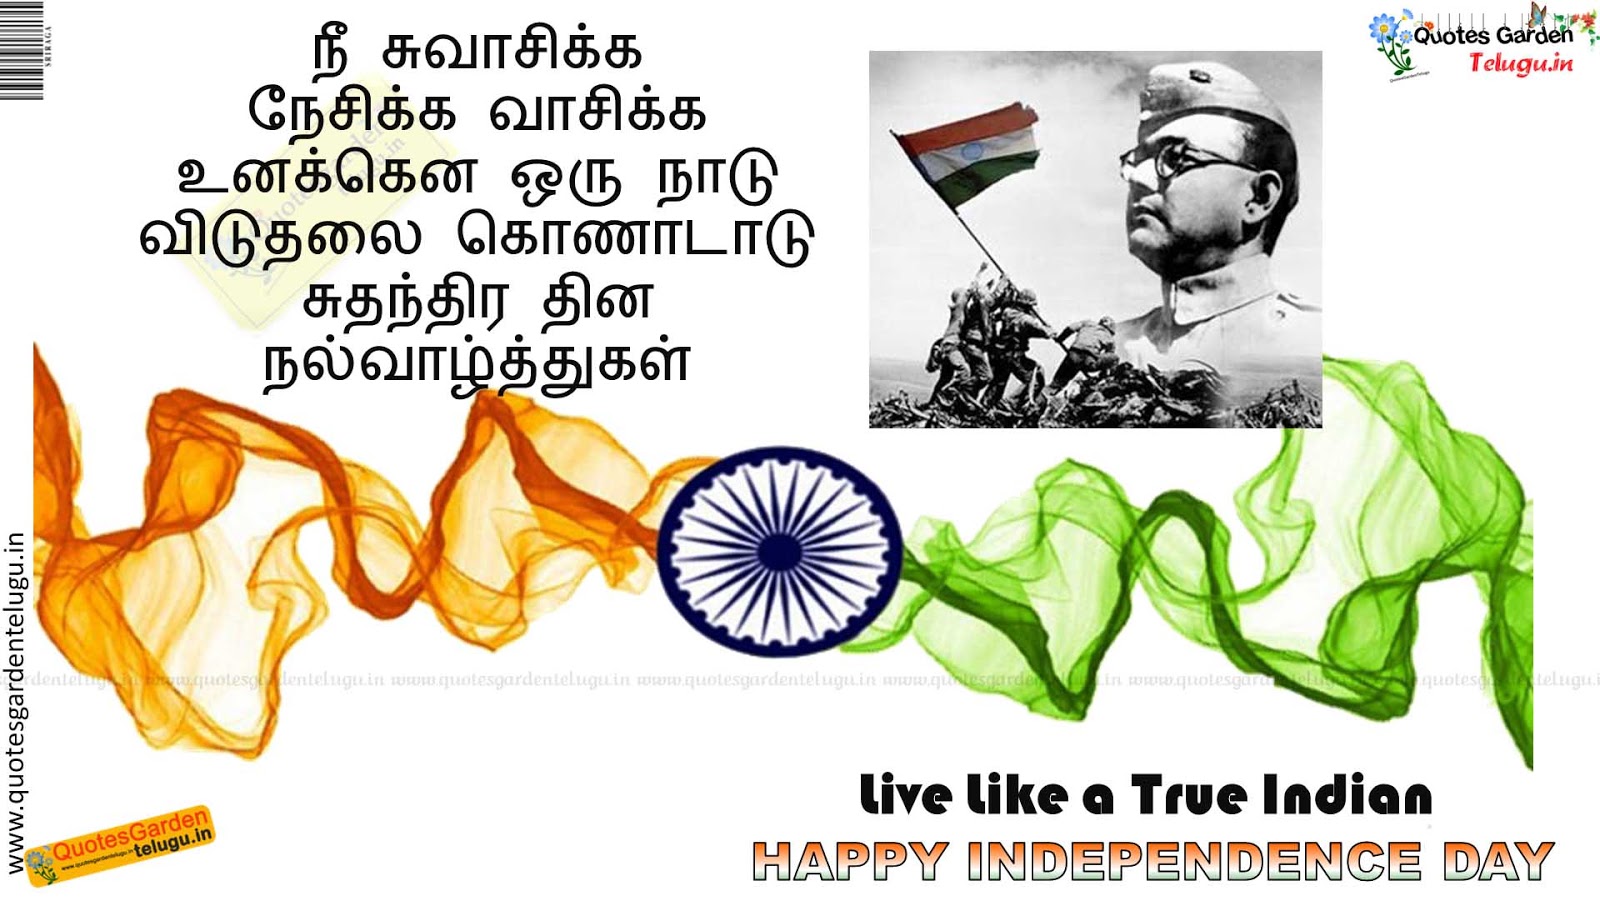 69th Independence day HD wallpapers in Tamil 881 | QUOTES GARDEN TELUGU |  Telugu Quotes | English Quotes | Hindi Quotes |